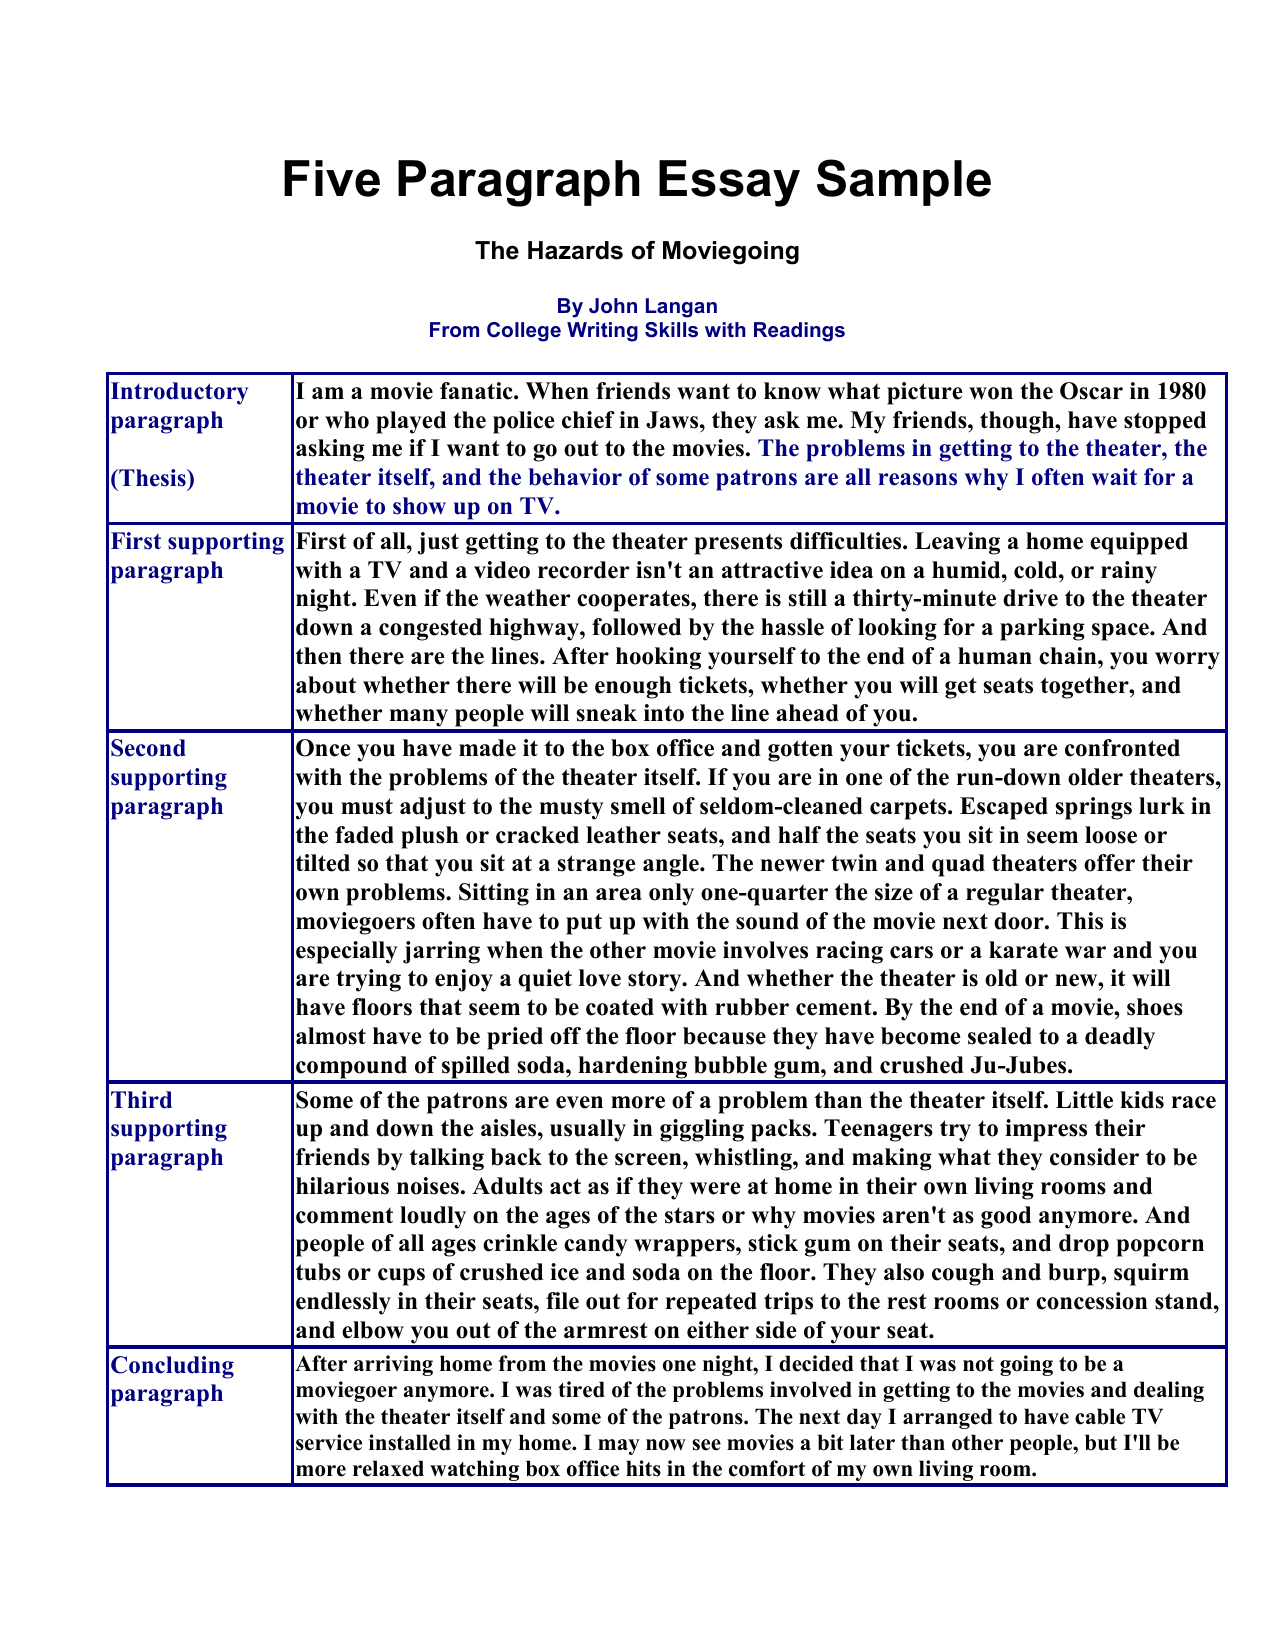 sample of five paragraph essay with thesis statement